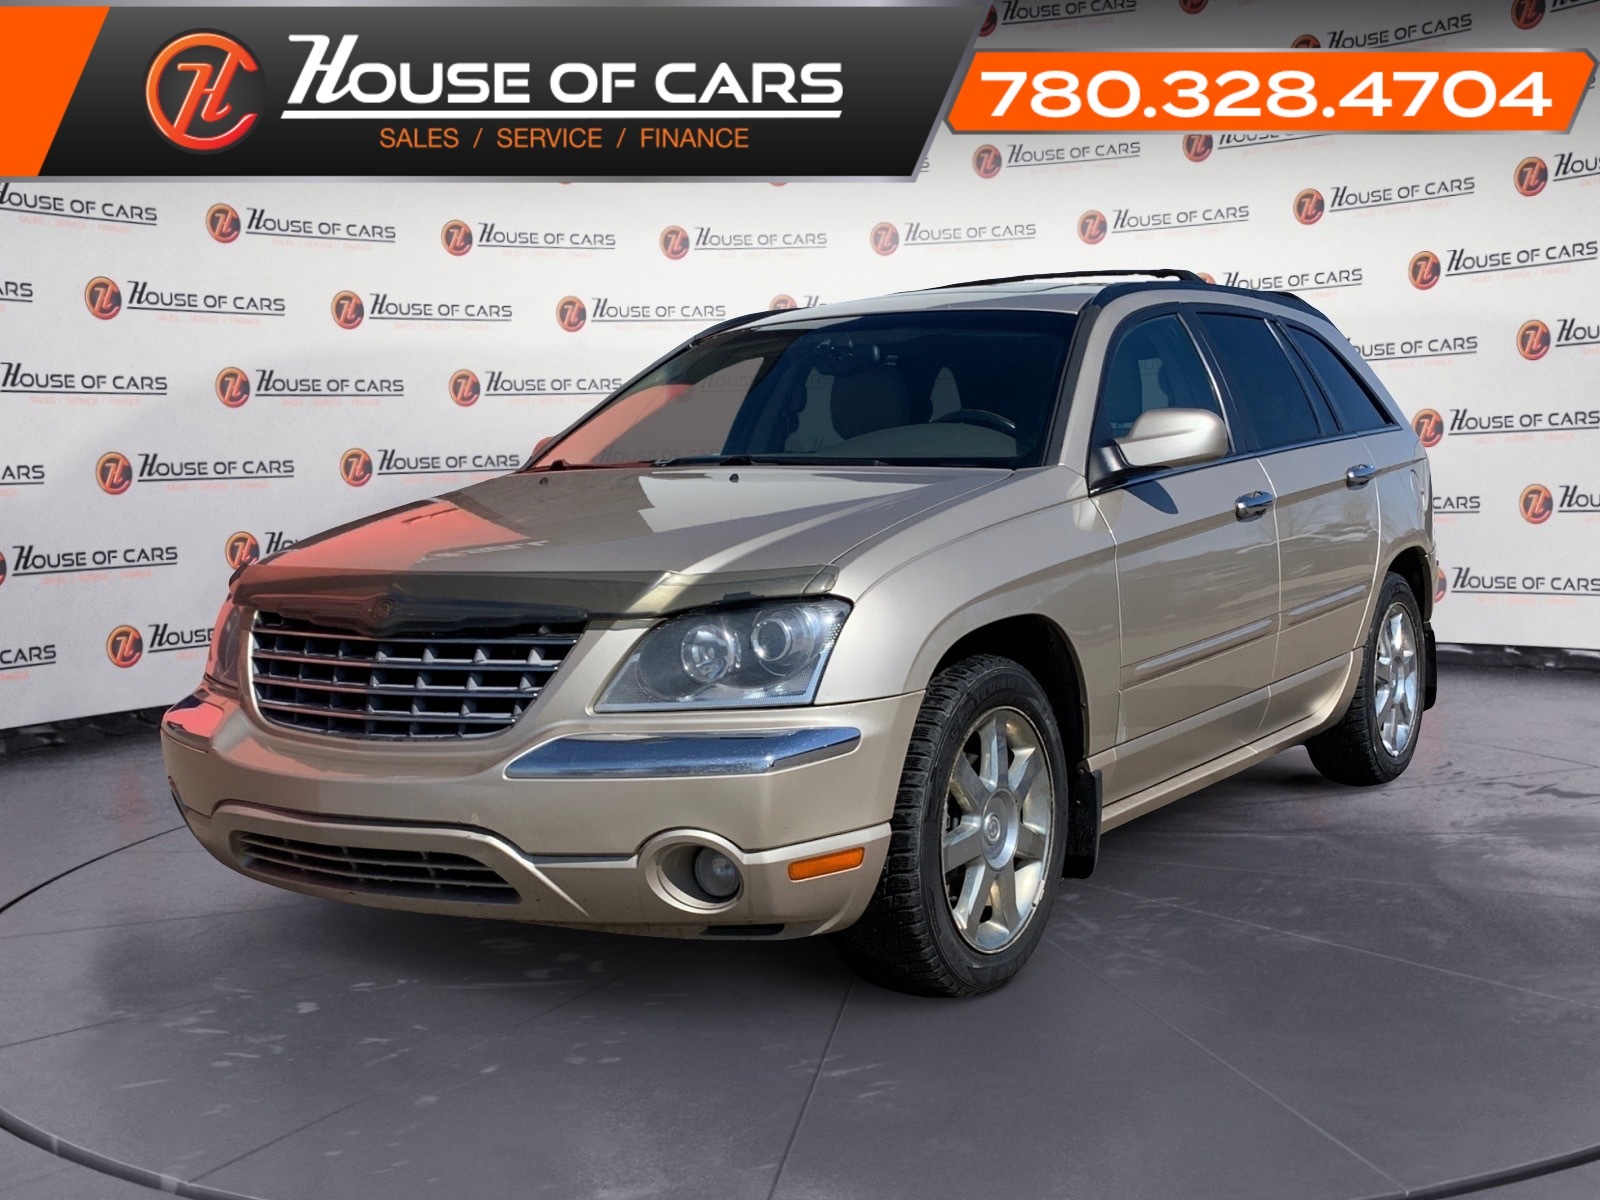 2005 Chrysler Pacifica 4dr Wgn Limited AWD